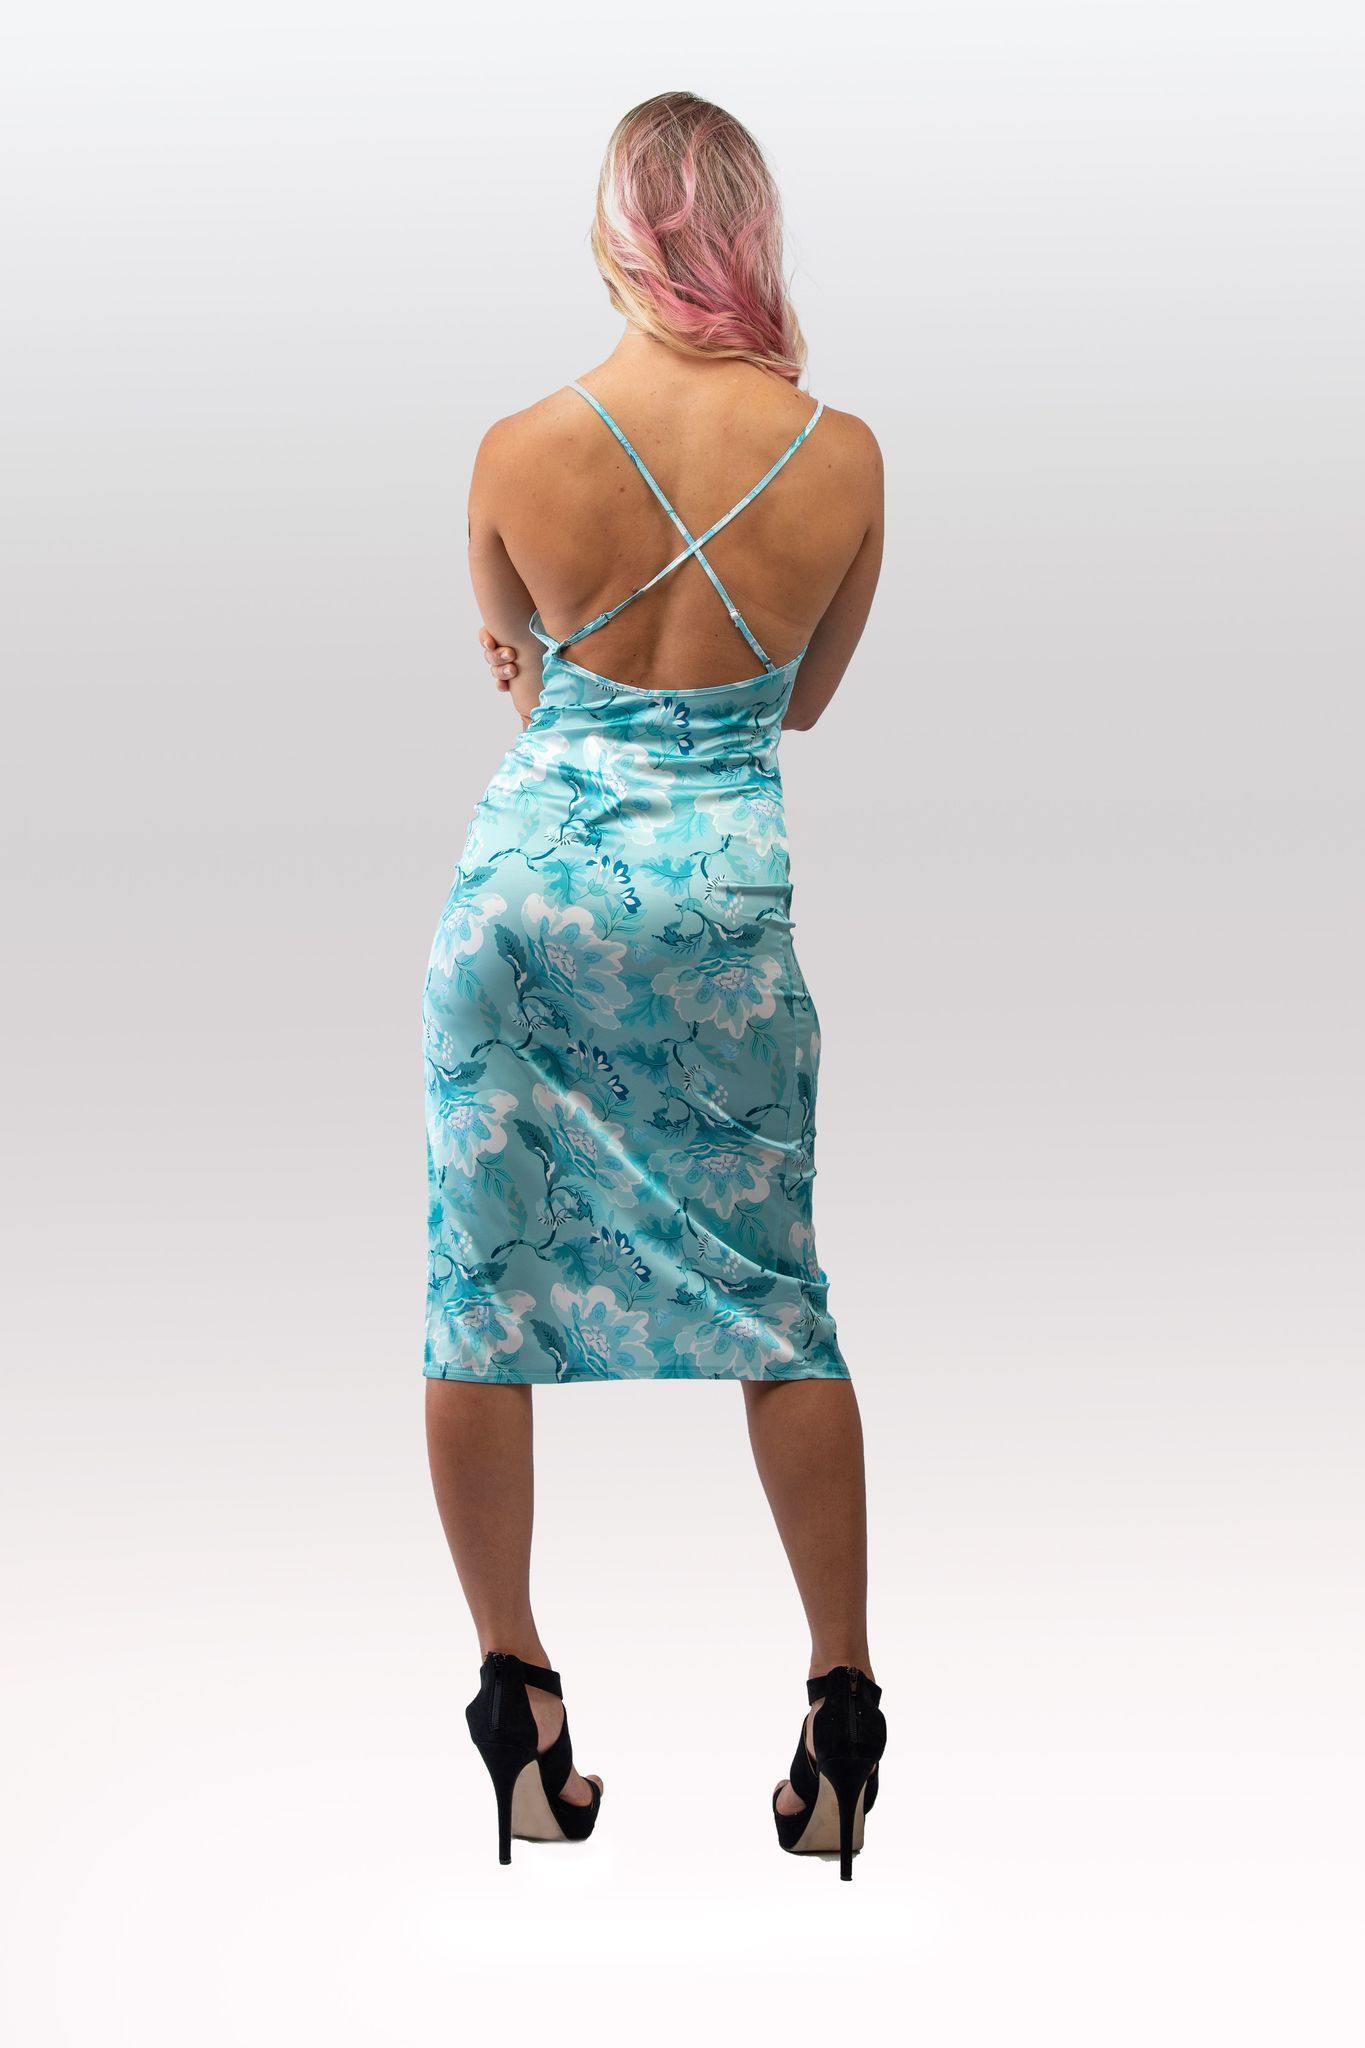 Cross Strap Back Floral Dress in Blue - watts that trend